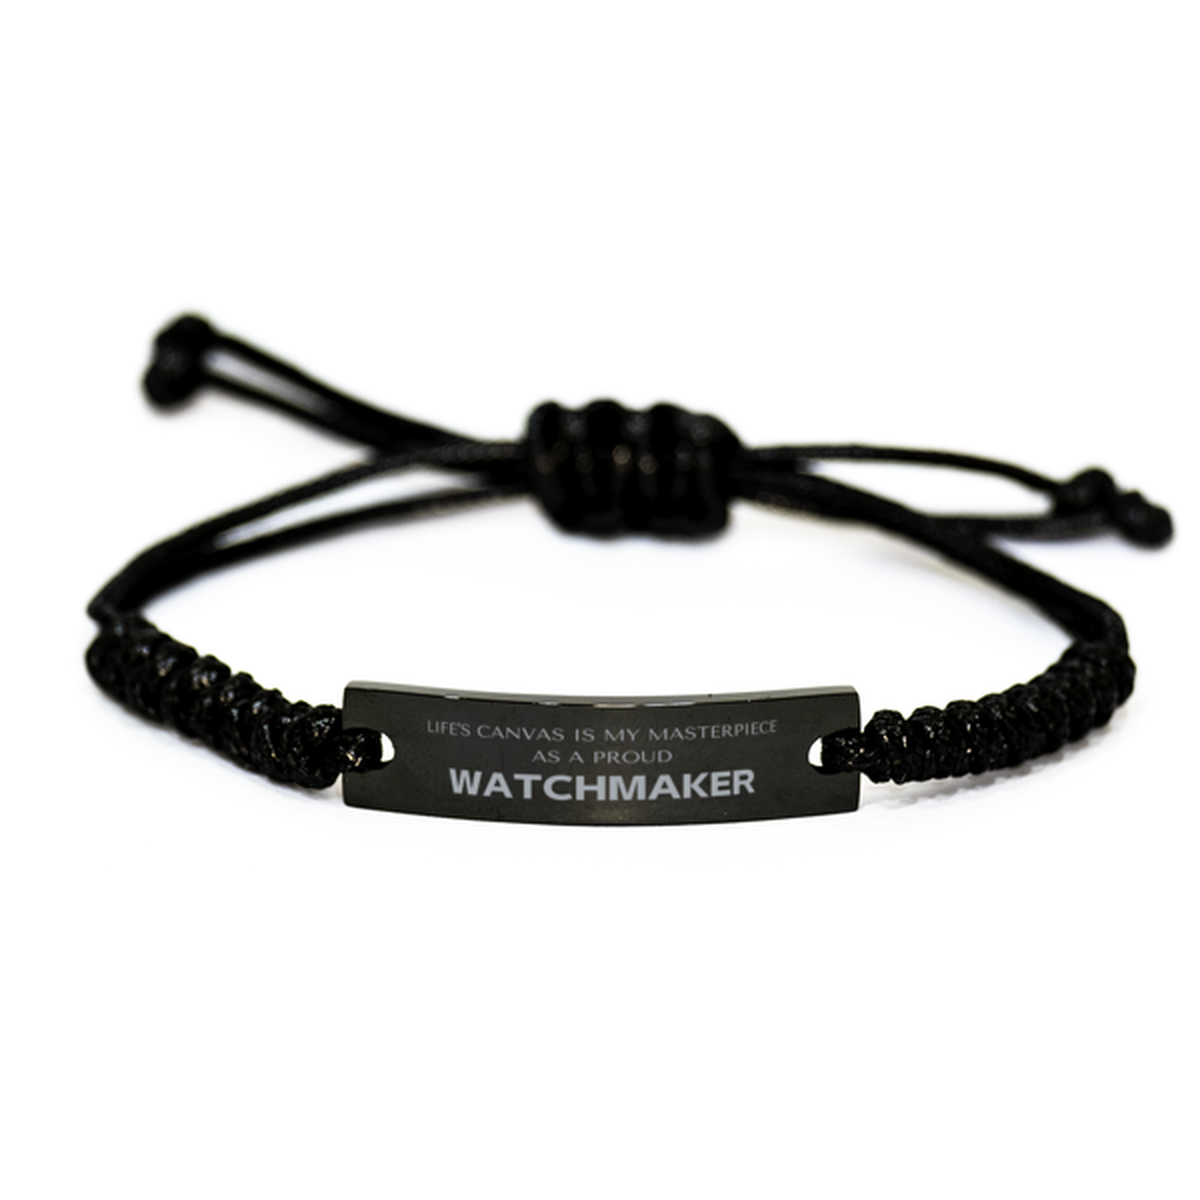 Proud Watchmaker Gifts, Life's canvas is my masterpiece, Epic Birthday Christmas Unique Black Rope Bracelet For Watchmaker, Coworkers, Men, Women, Friends